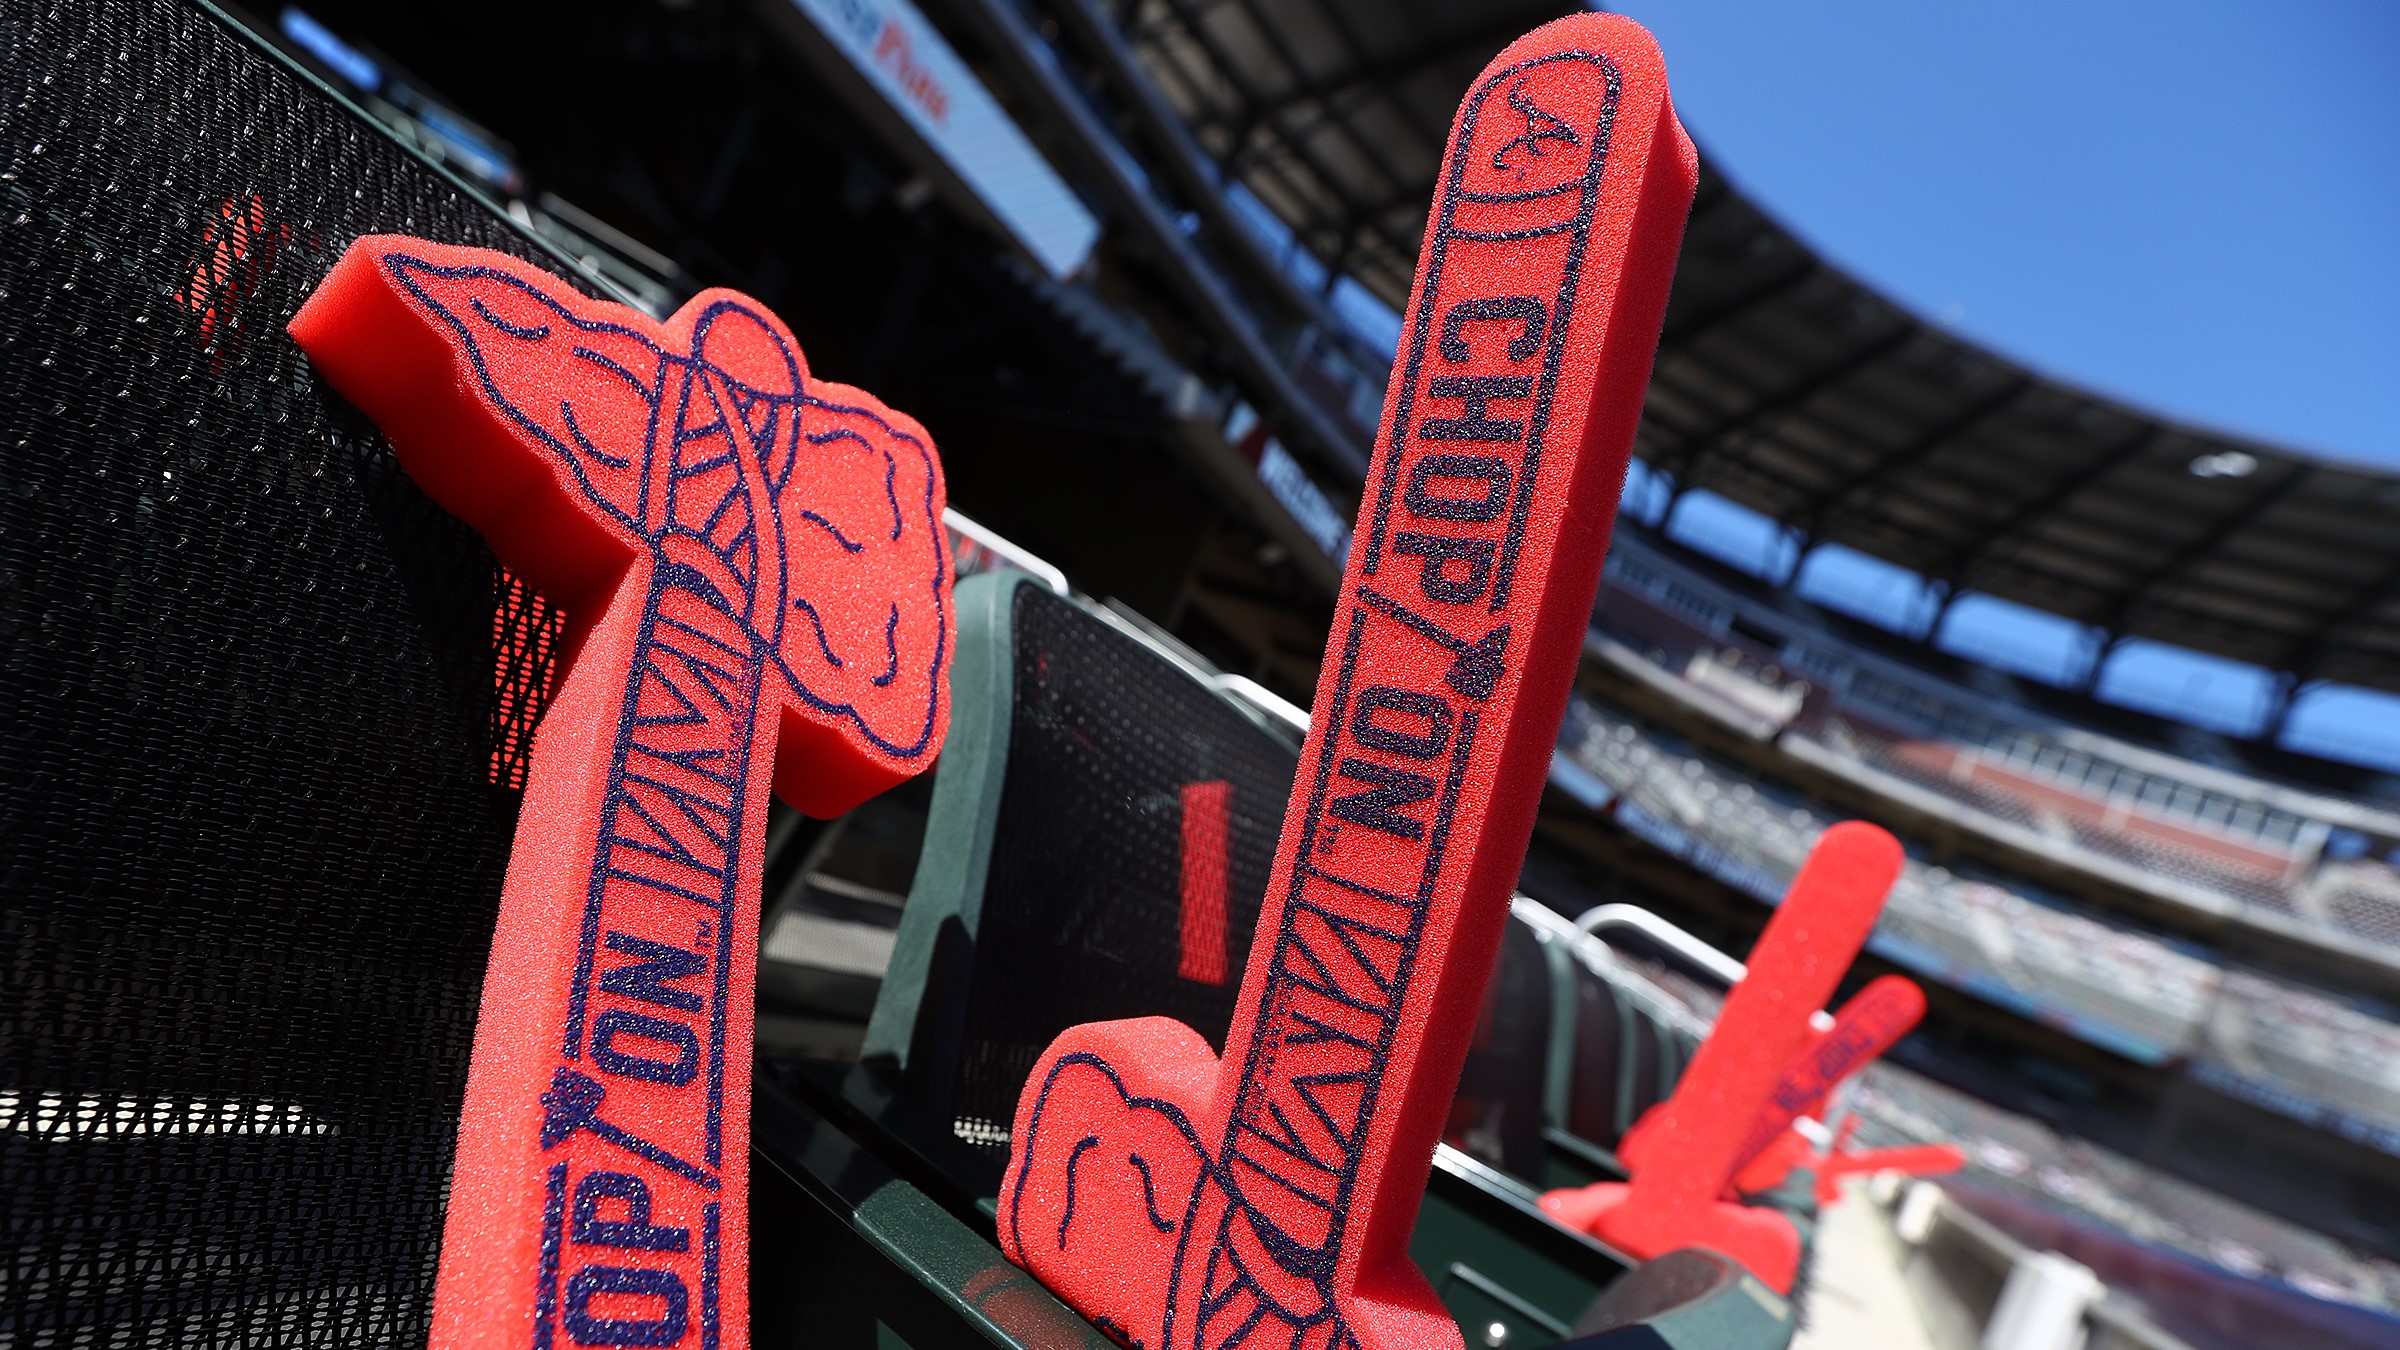 Why the Atlanta Braves aren't brave enough to lose the tomahawk chop